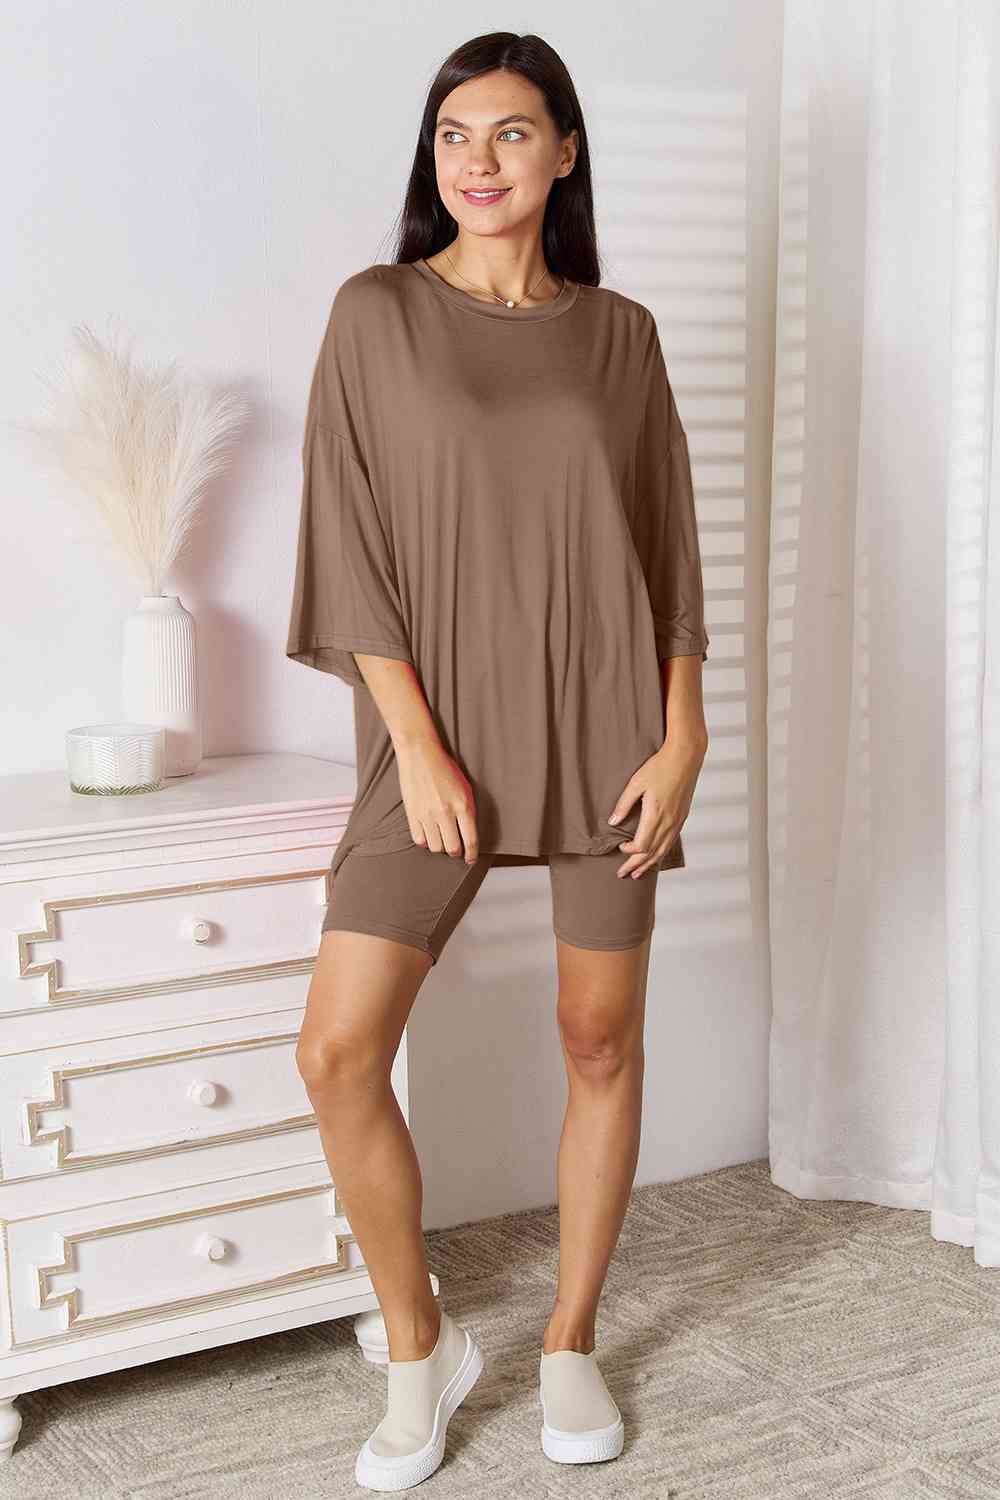 Soft Rayon Three-Quarter Sleeve Top and Shorts Set - Taupe / S - Camis & Tops - Outfit Sets - 1 - 2024